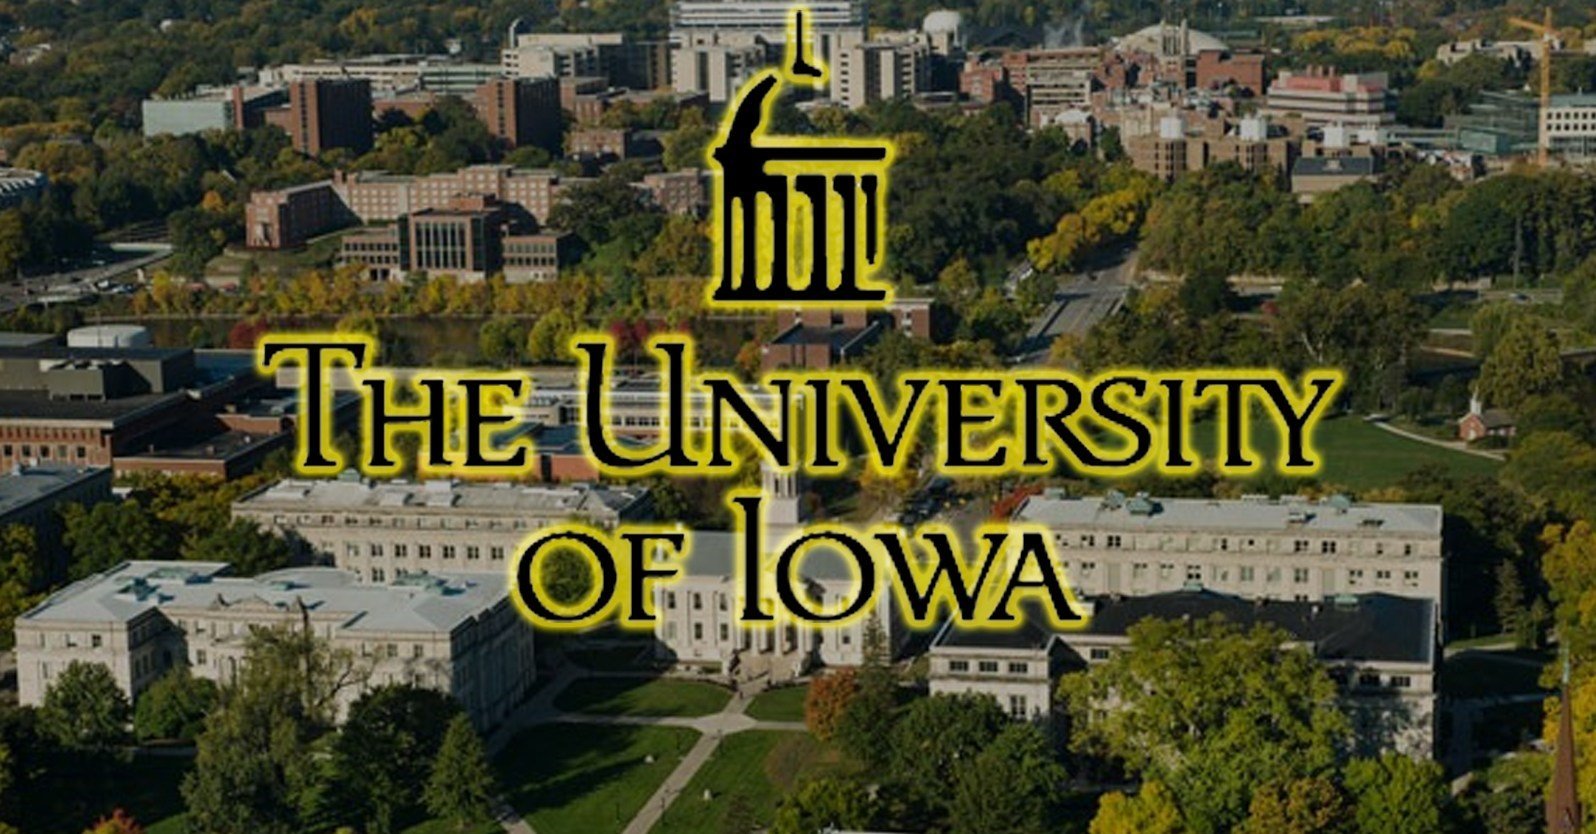 University of Iowa releases statement following discovery, arres - KWWL